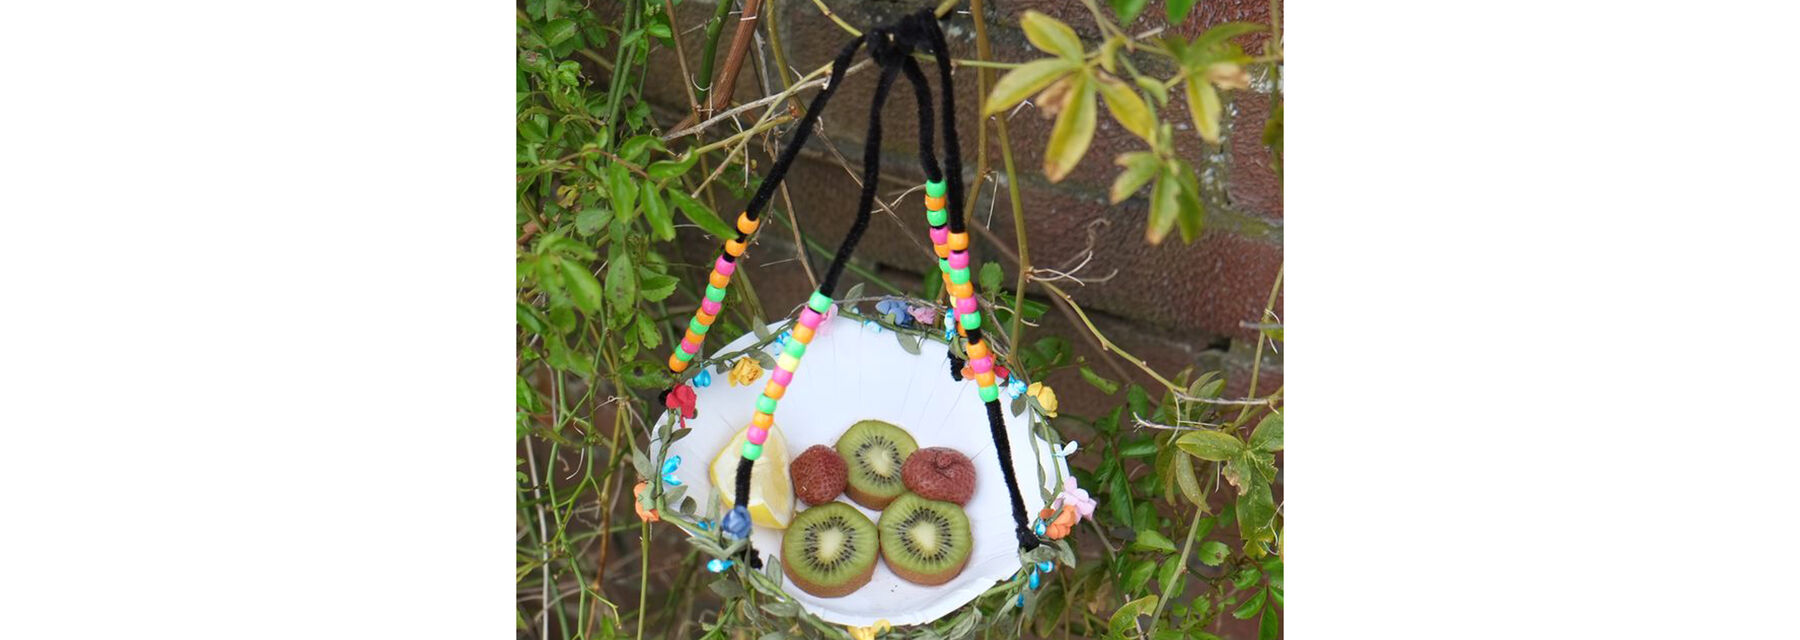 A photograph of a butterfly feeder made from a paper plate and suspended by thick string from a bush, near a stone wall. The strings are decorated with multi-coloured beads. Slices of kiwi, lemon and strawberries lie on the plate.